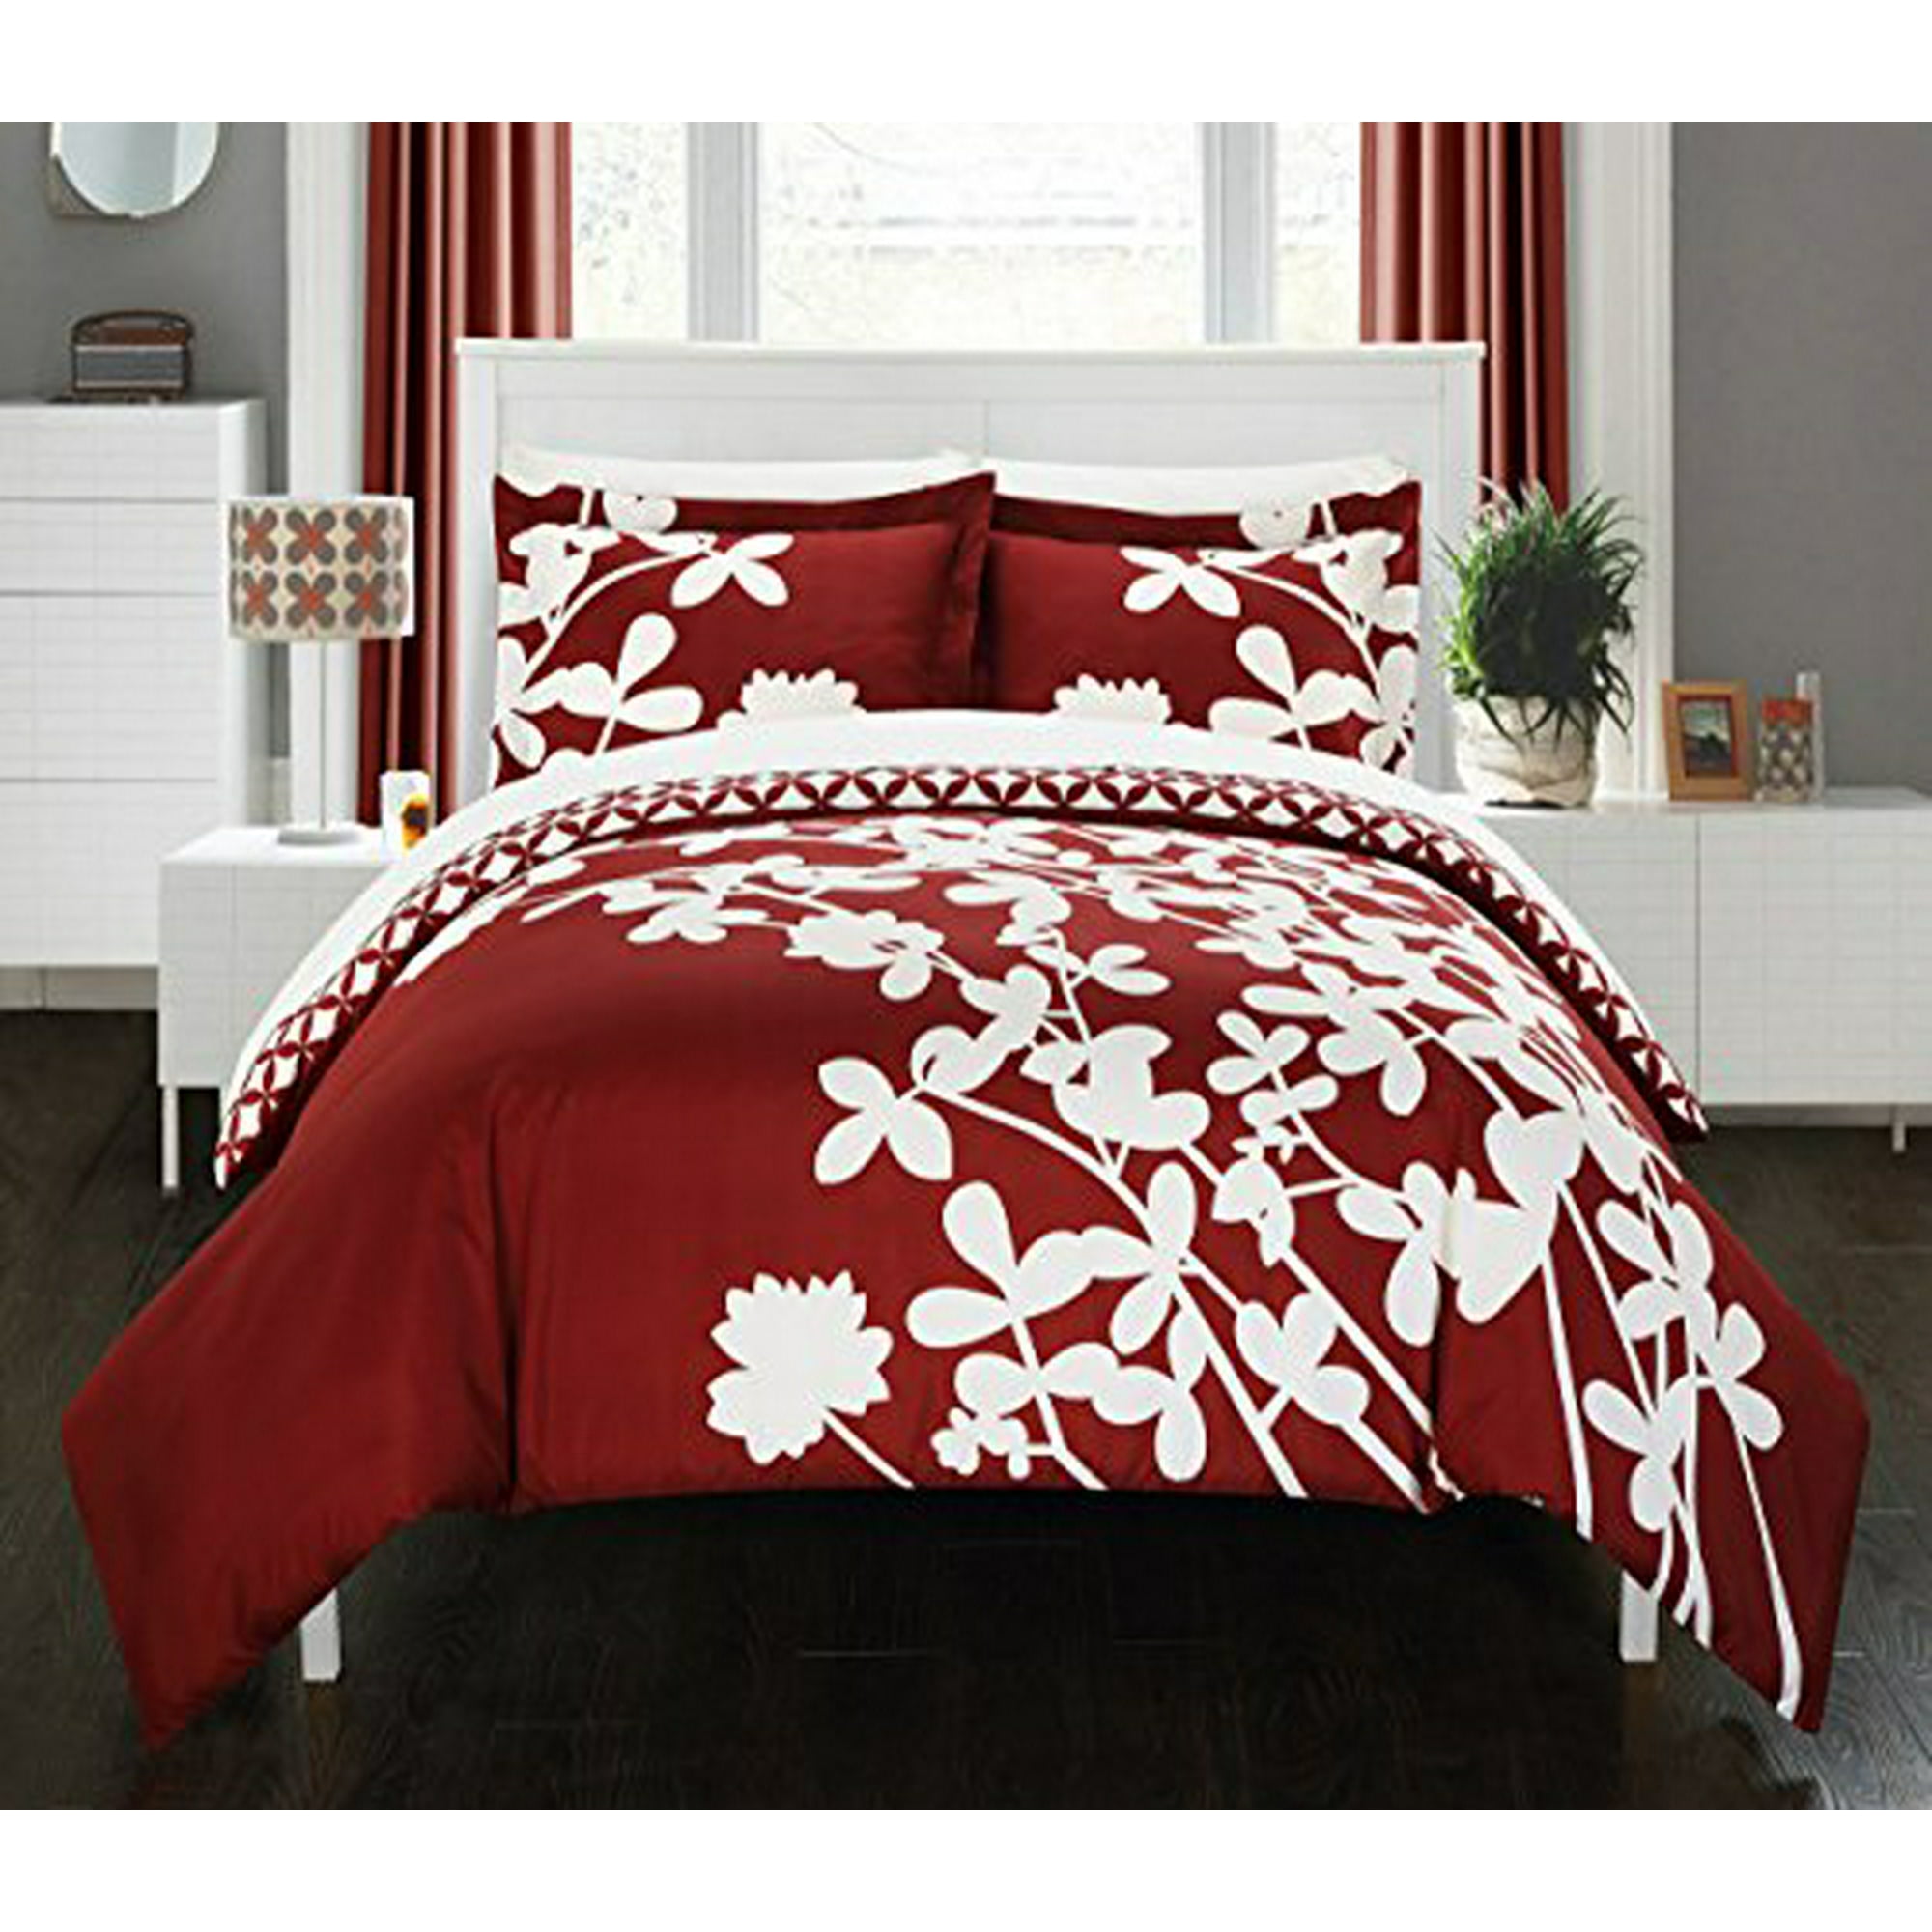 Chic Home 3 Piece Calla Lily Reversible Large Scale Floral Design